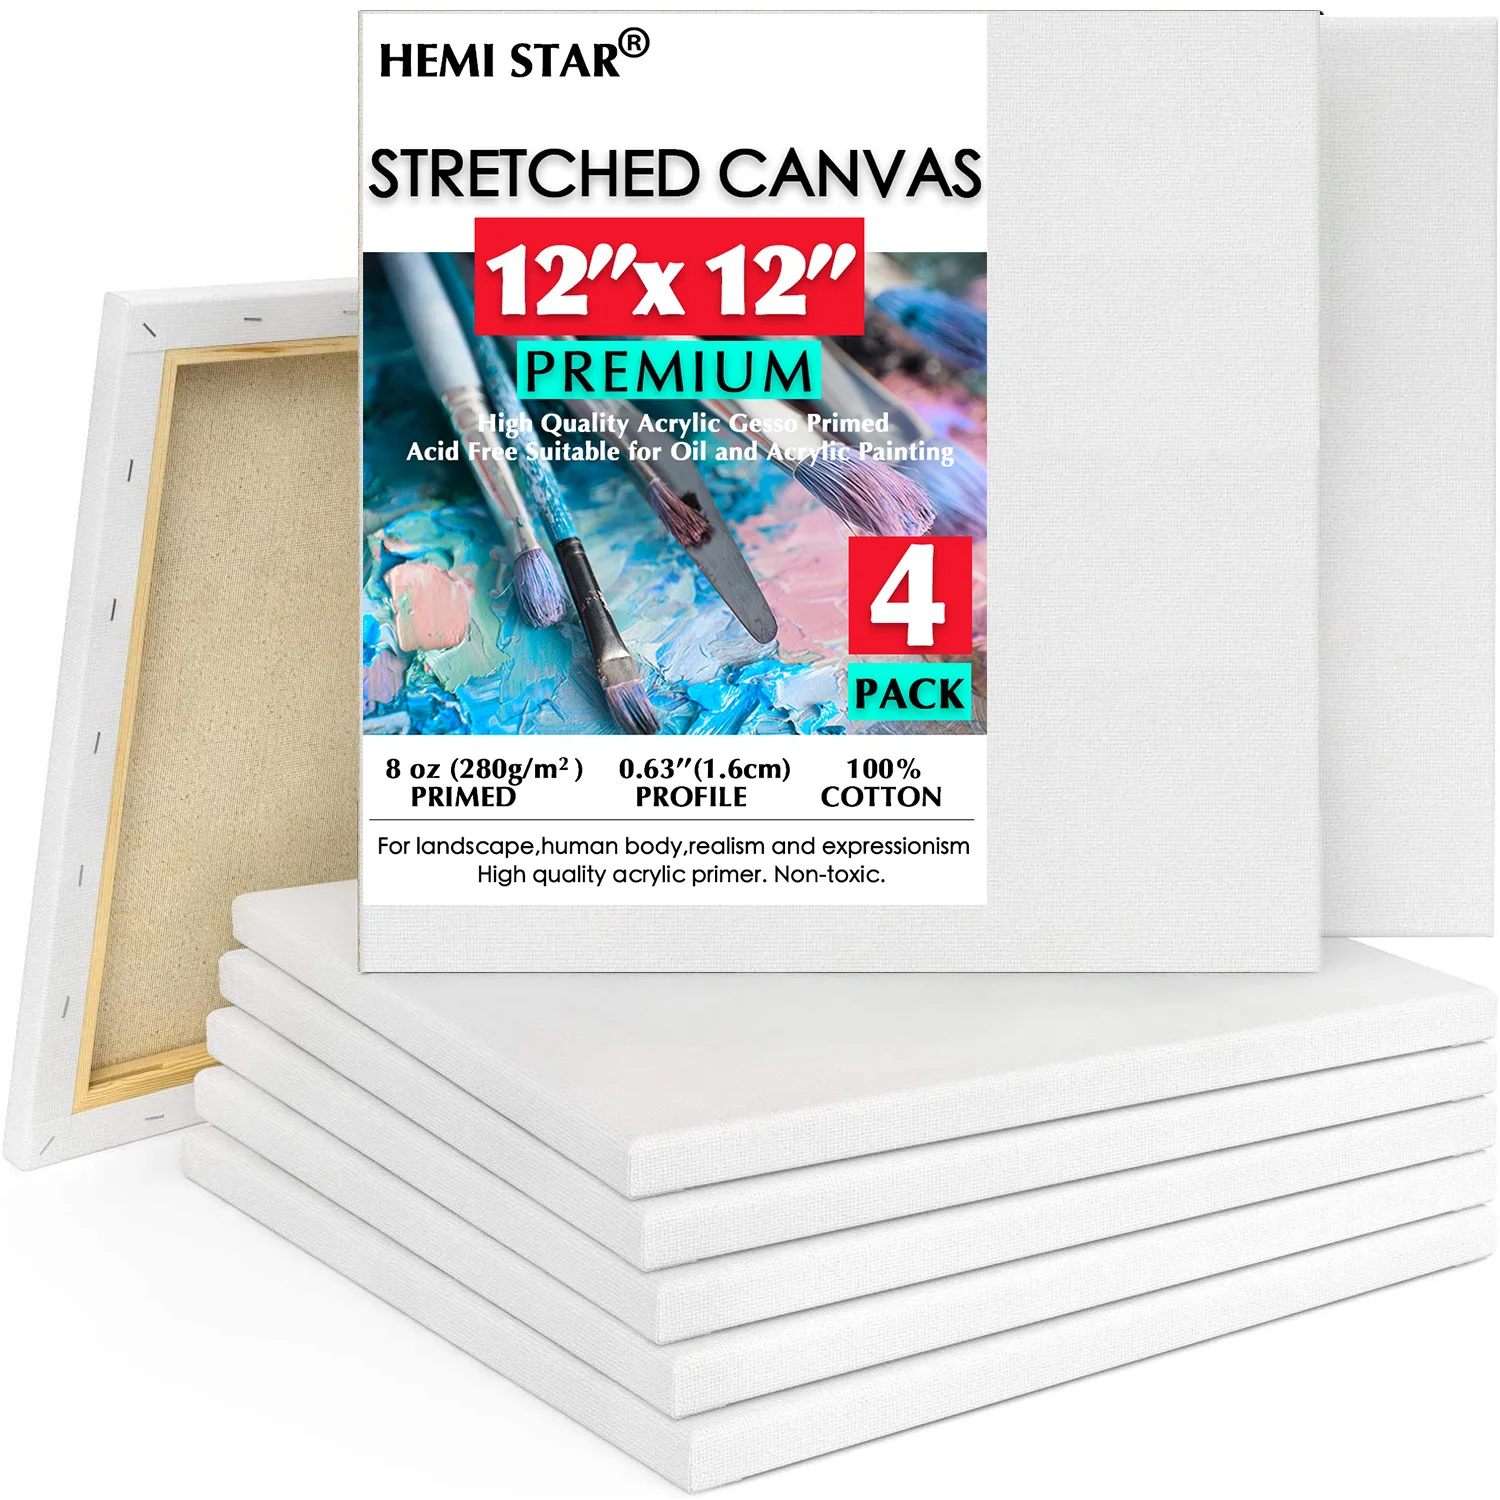 4 Pack Stretched Canvas for Painting 30x30cm,12x12 inch Primed 100